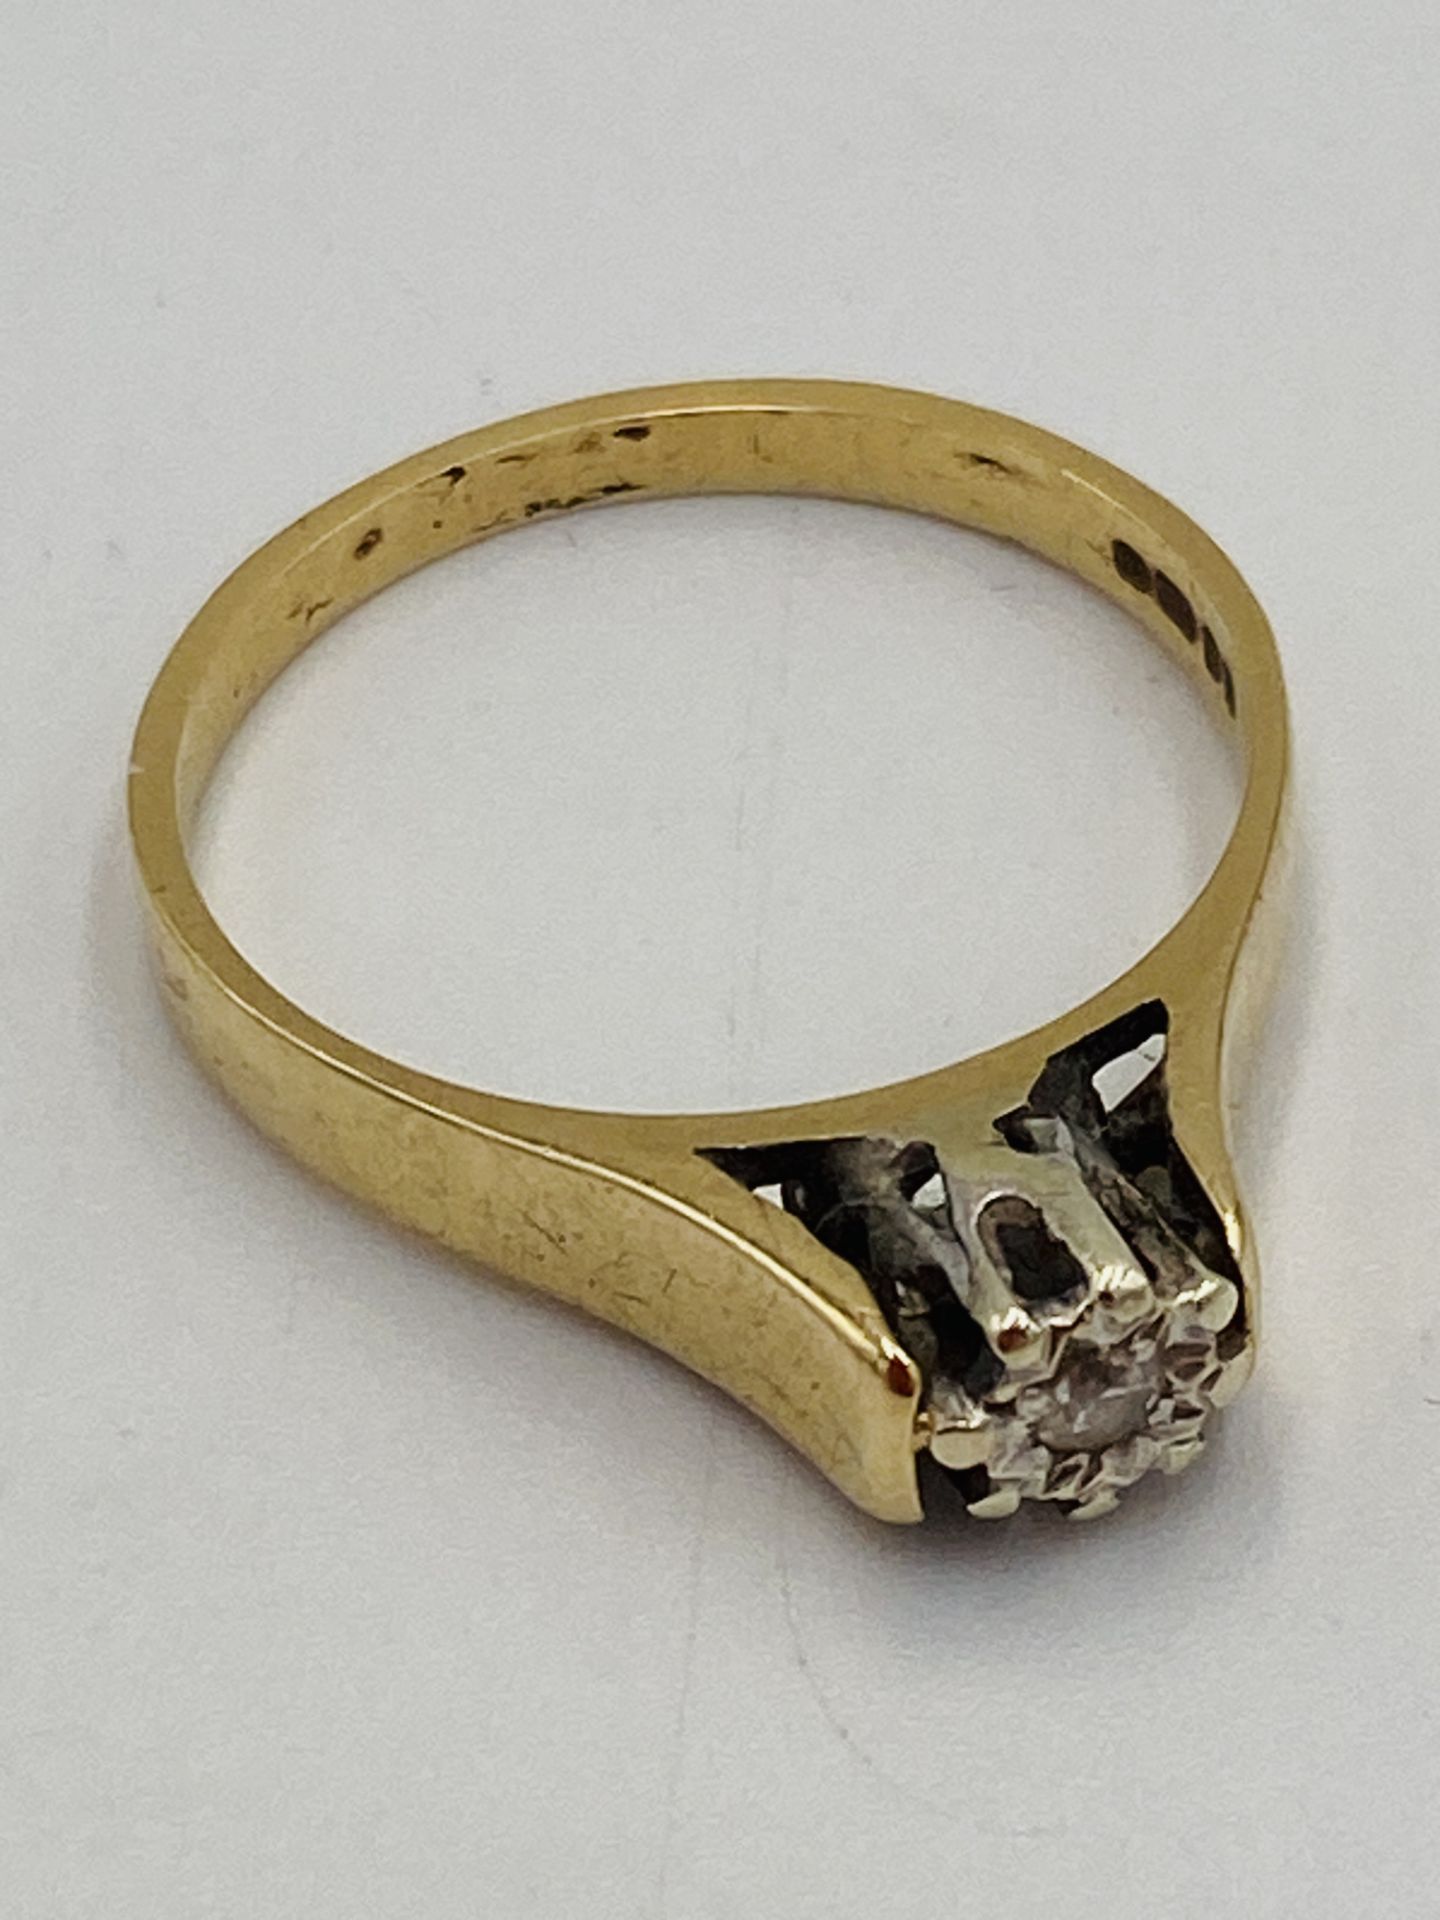 9ct gold solitaire ring - Image 2 of 6